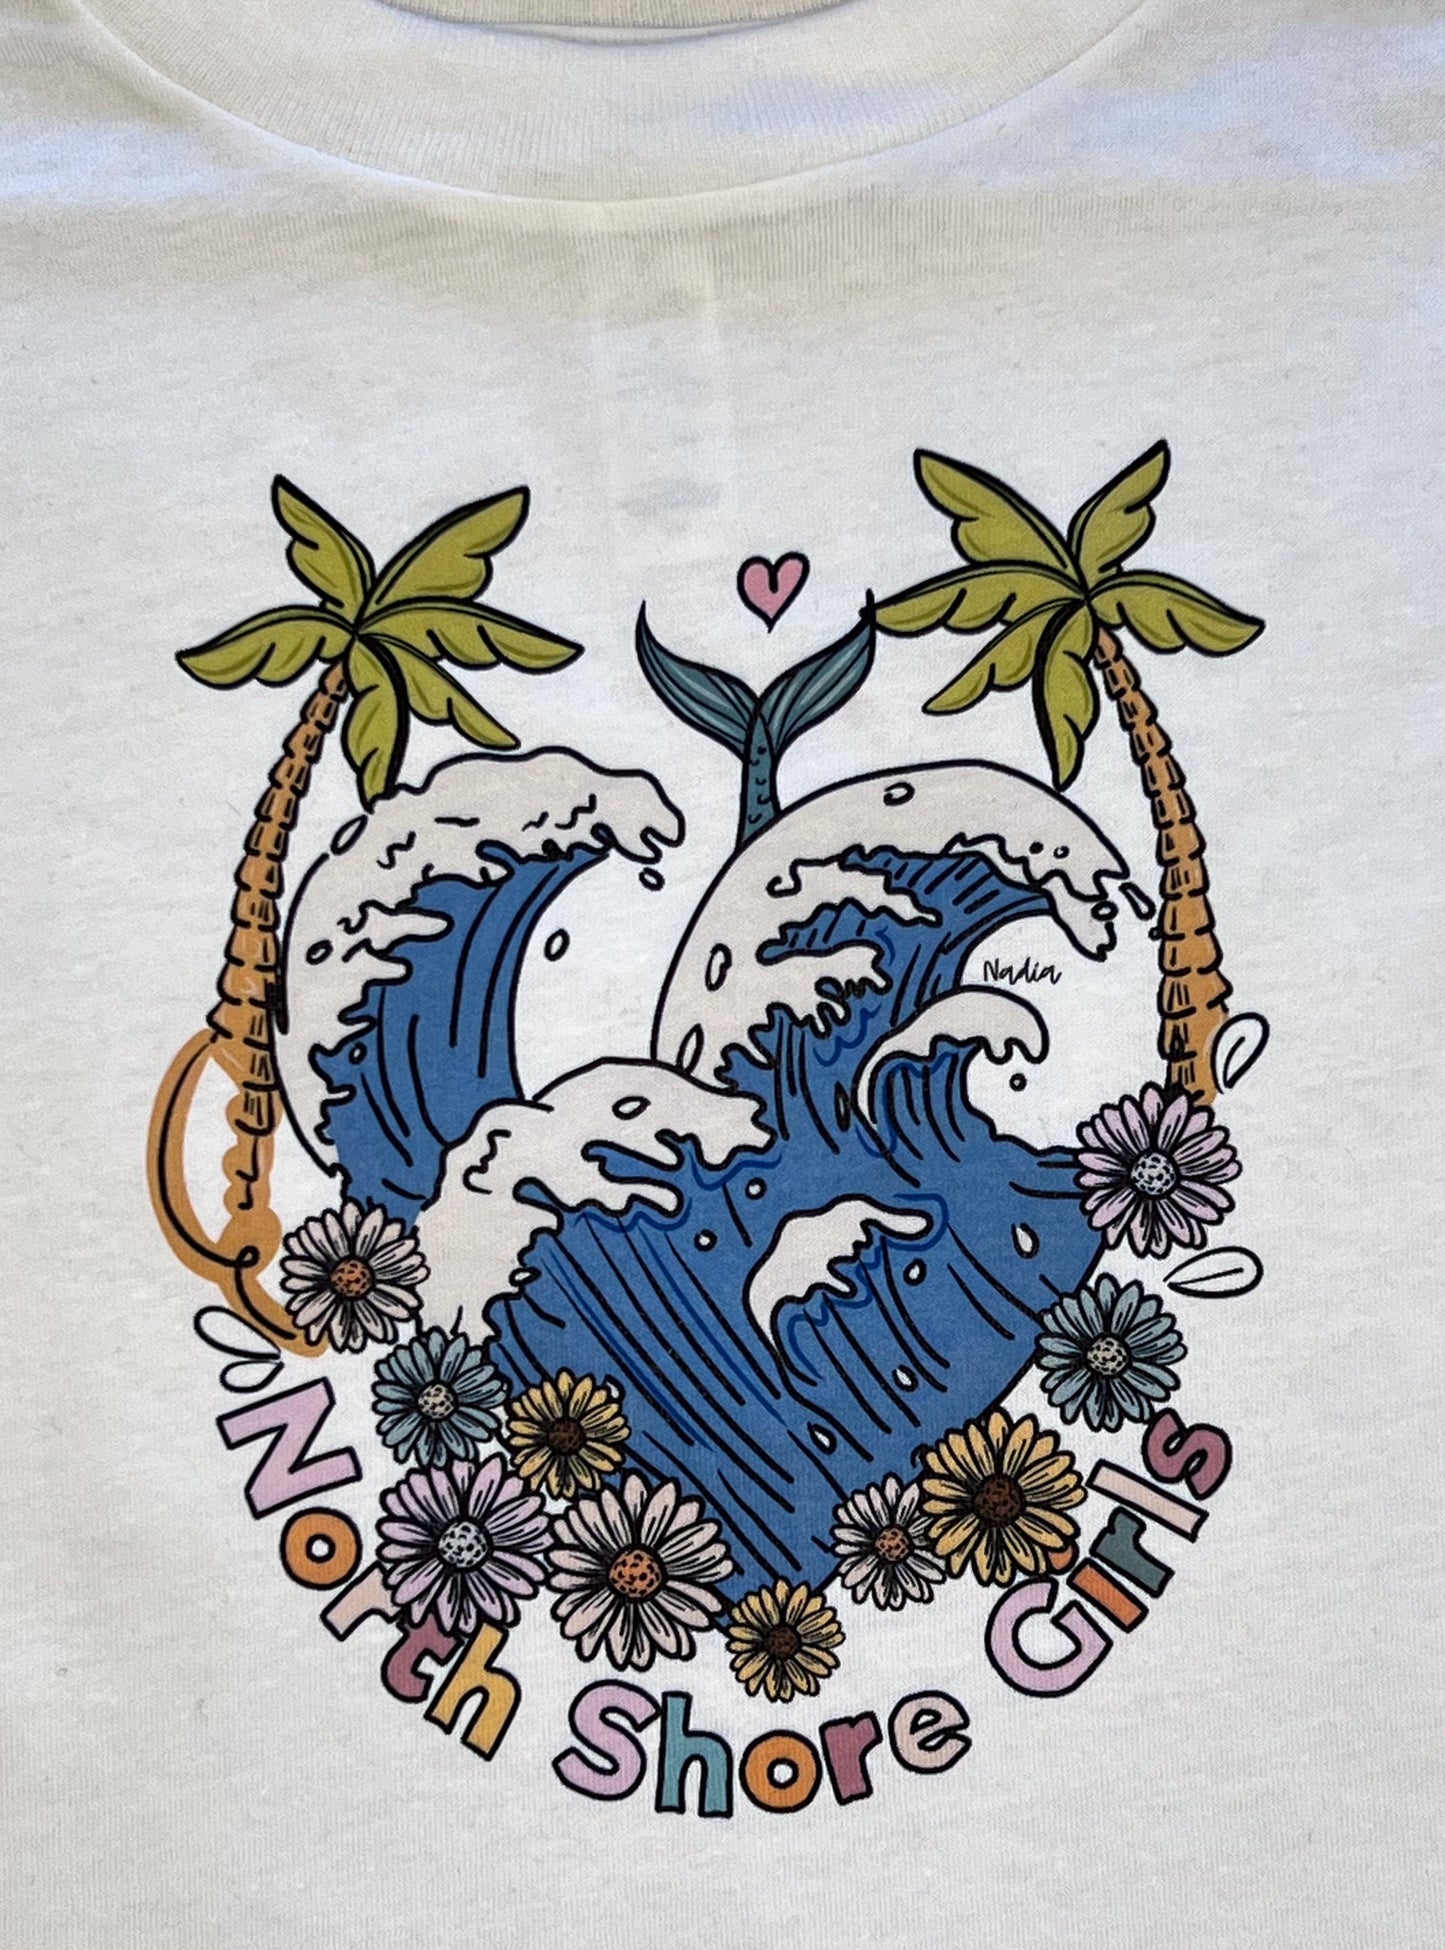 Wearable art by Nadia Watts. North Shore Girl graphic tee for surfer girls